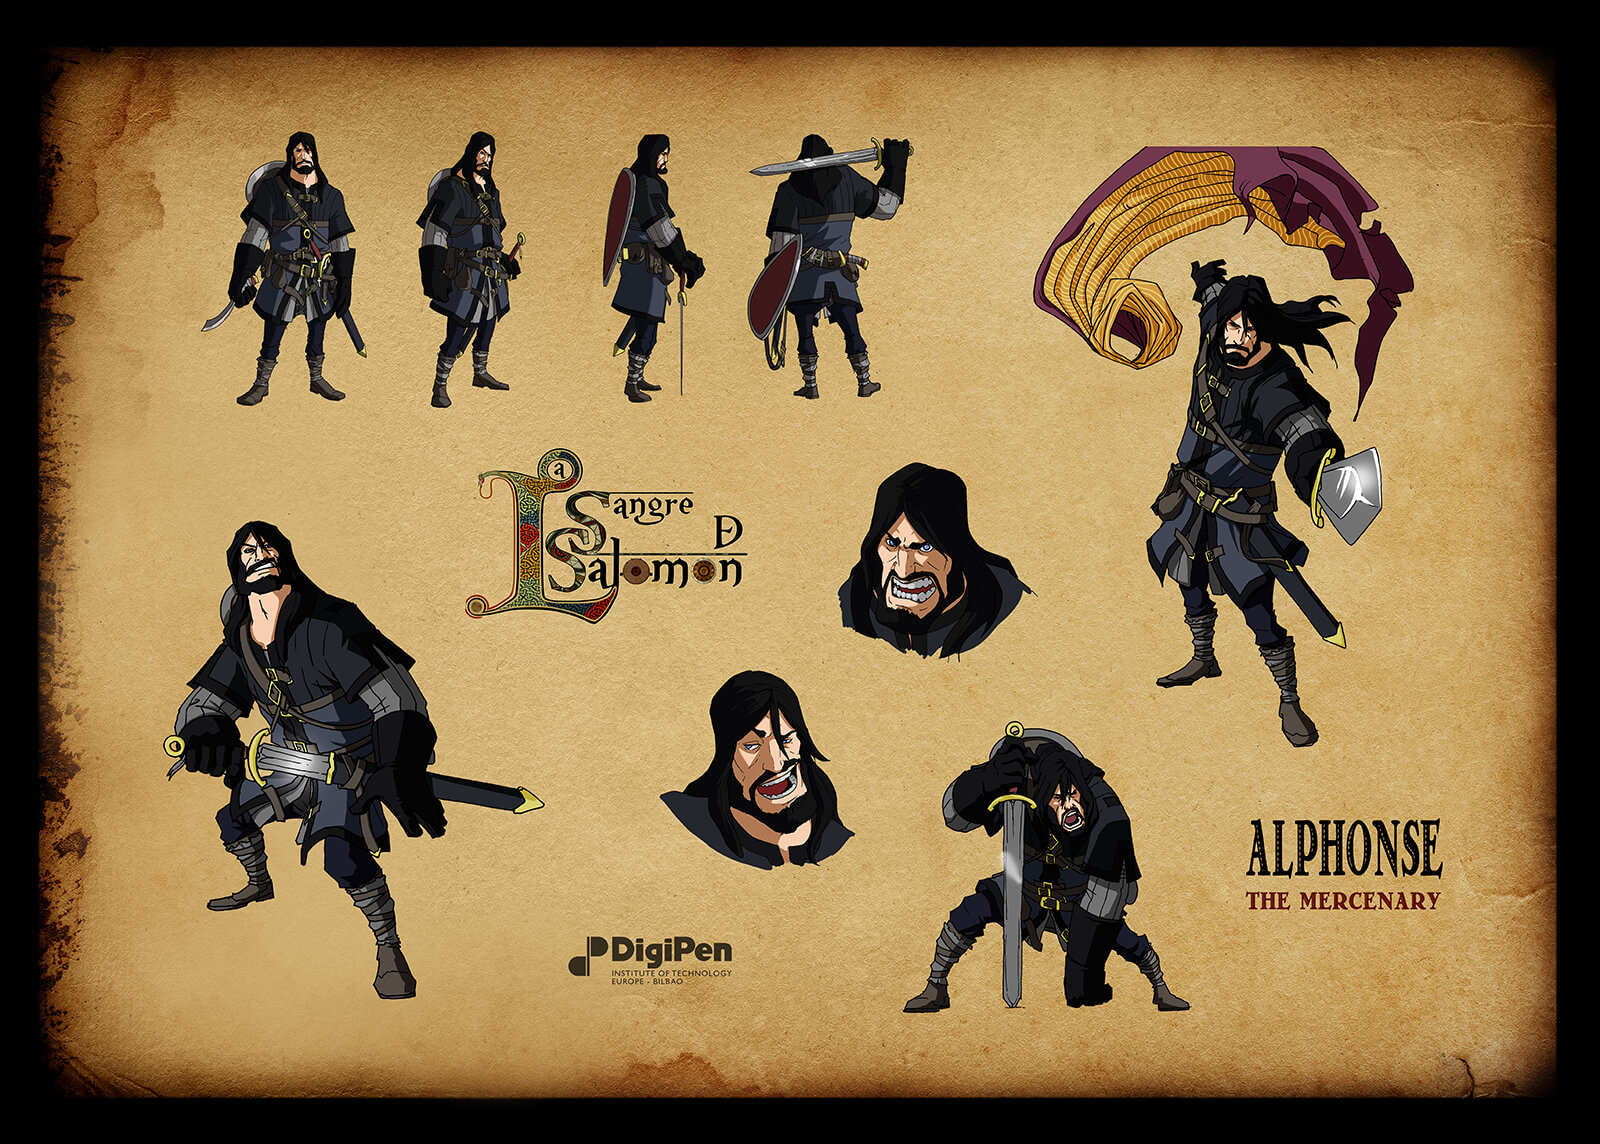 Concept paintings for Alphonse the Mercenary in Sangre de Salomon in various battle poses and expressions